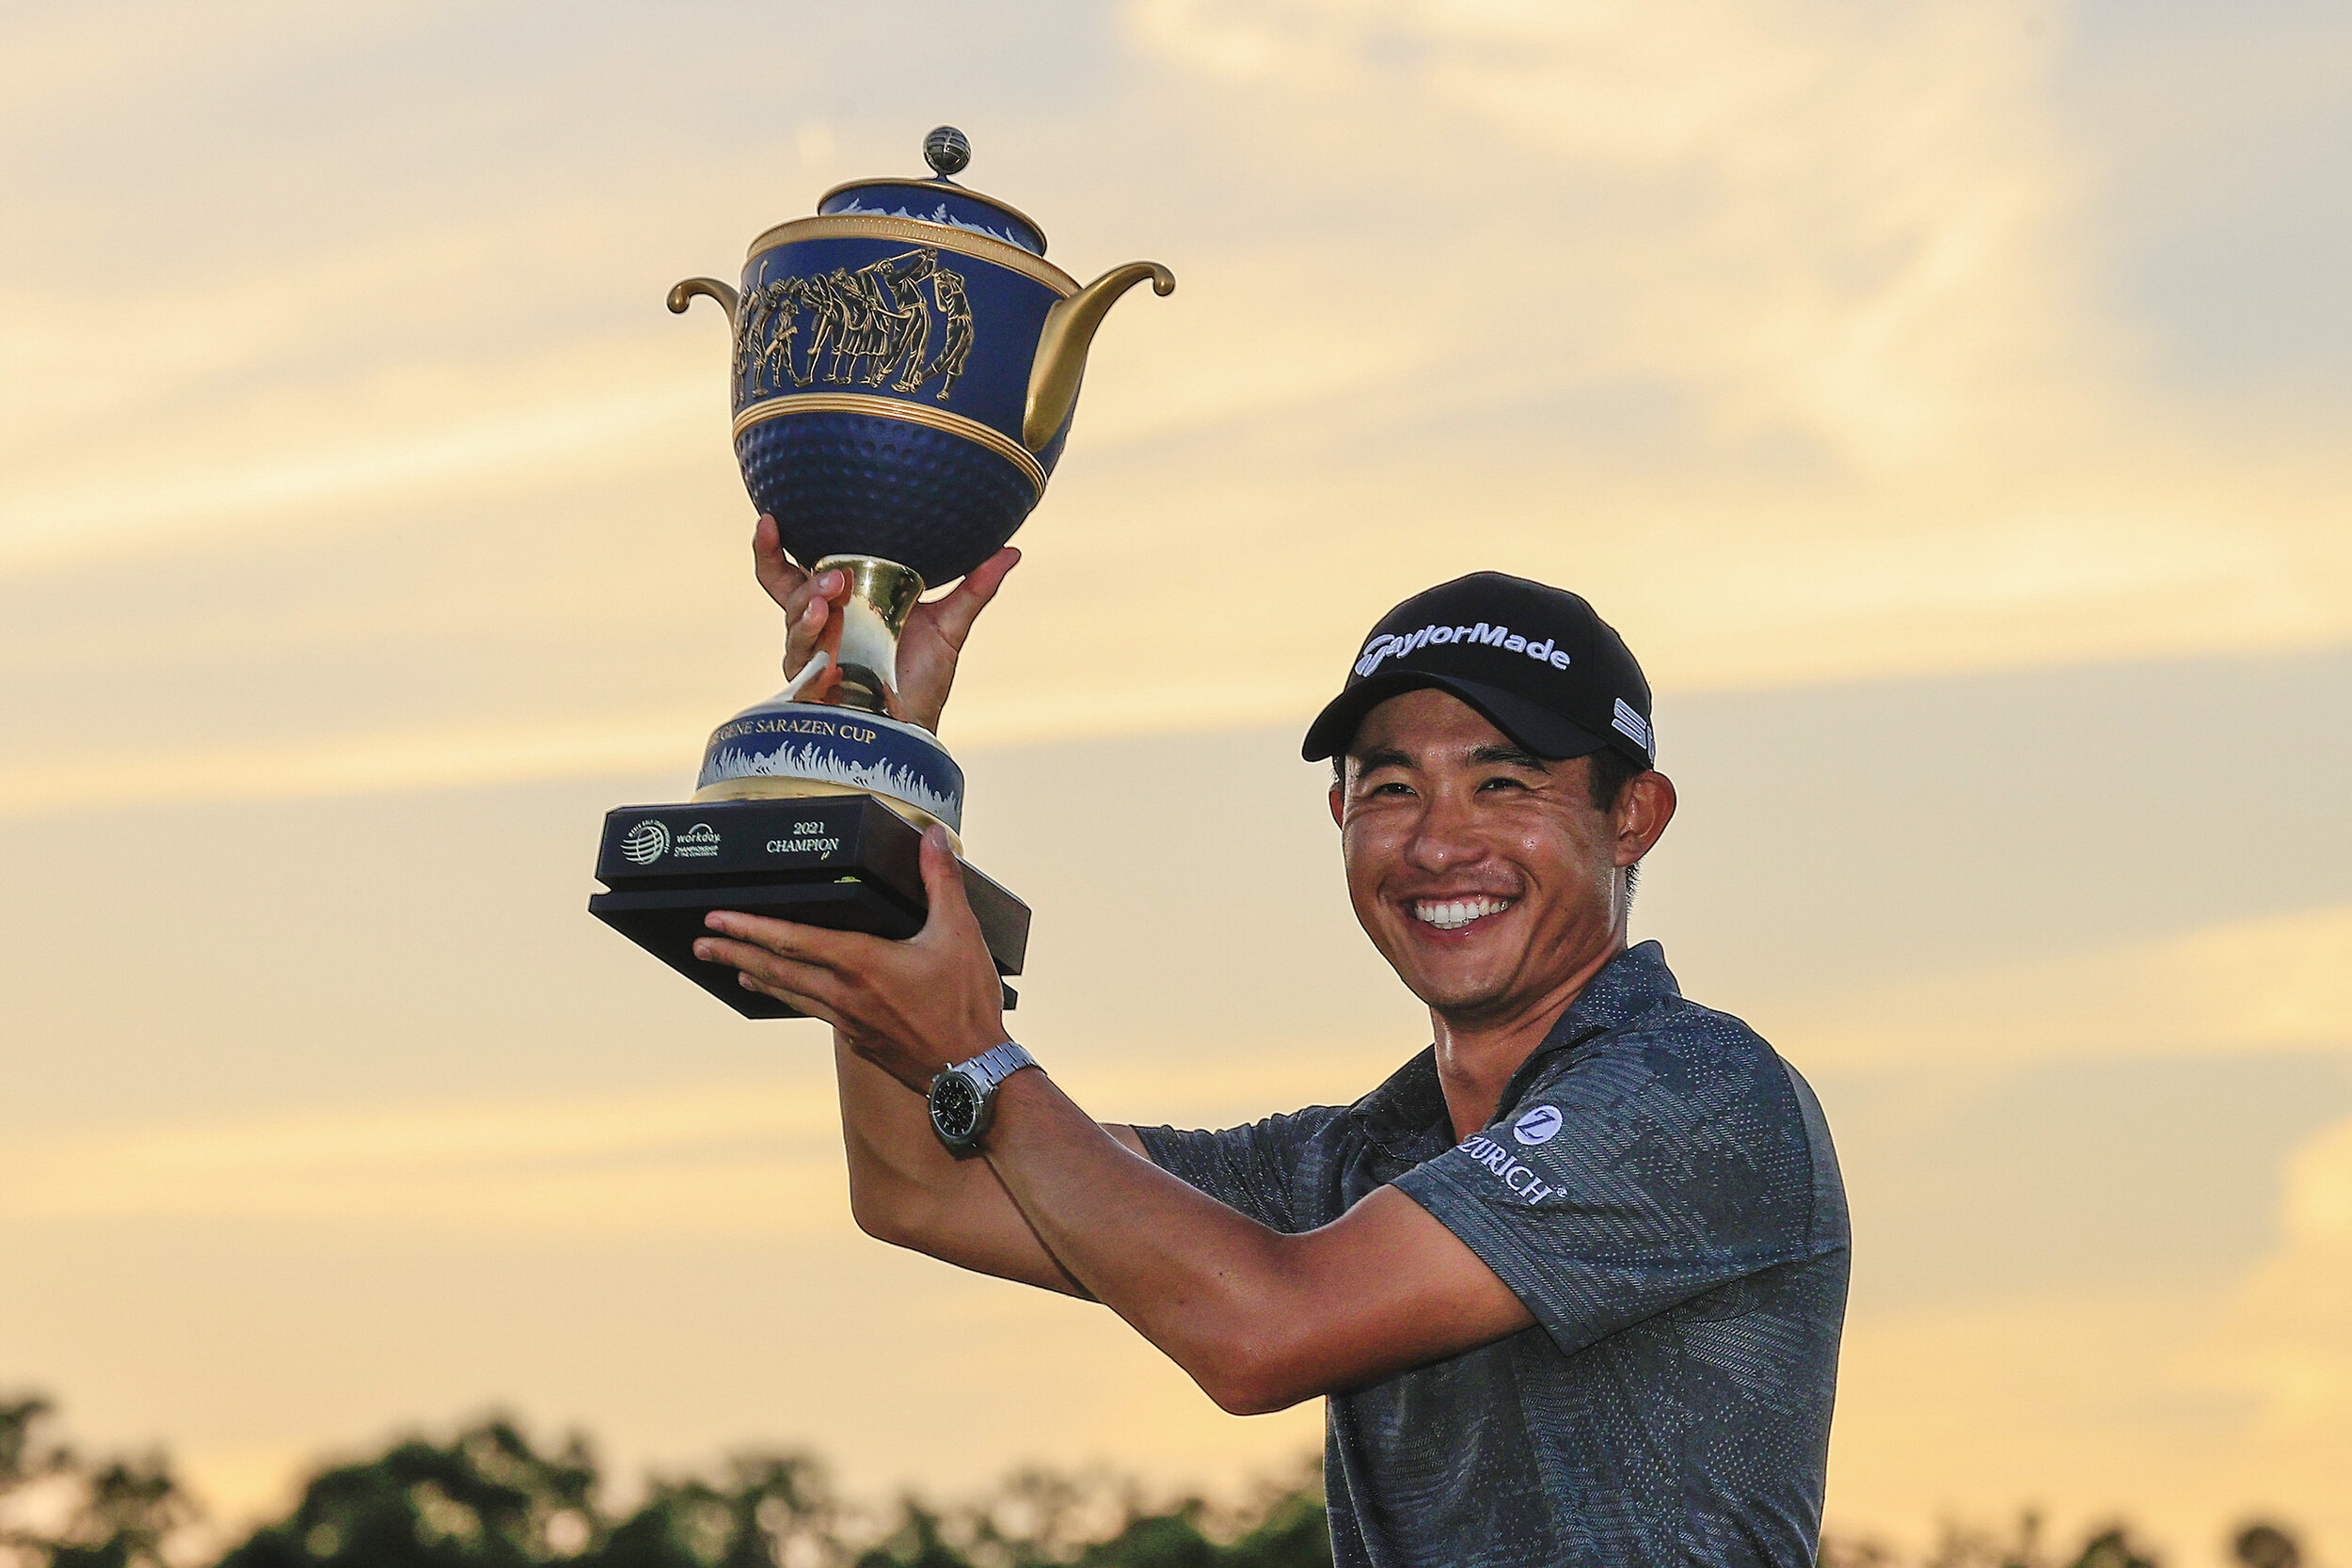  BRADENTON, FLORIDA - FEBRUARY 28: Collin Morikawa of the United States celebrates with the Gene Sarazen Cup during the trophy ceremony after winning the final round of World Golf Championships-Workday Championship at The Concession on February 28, 2